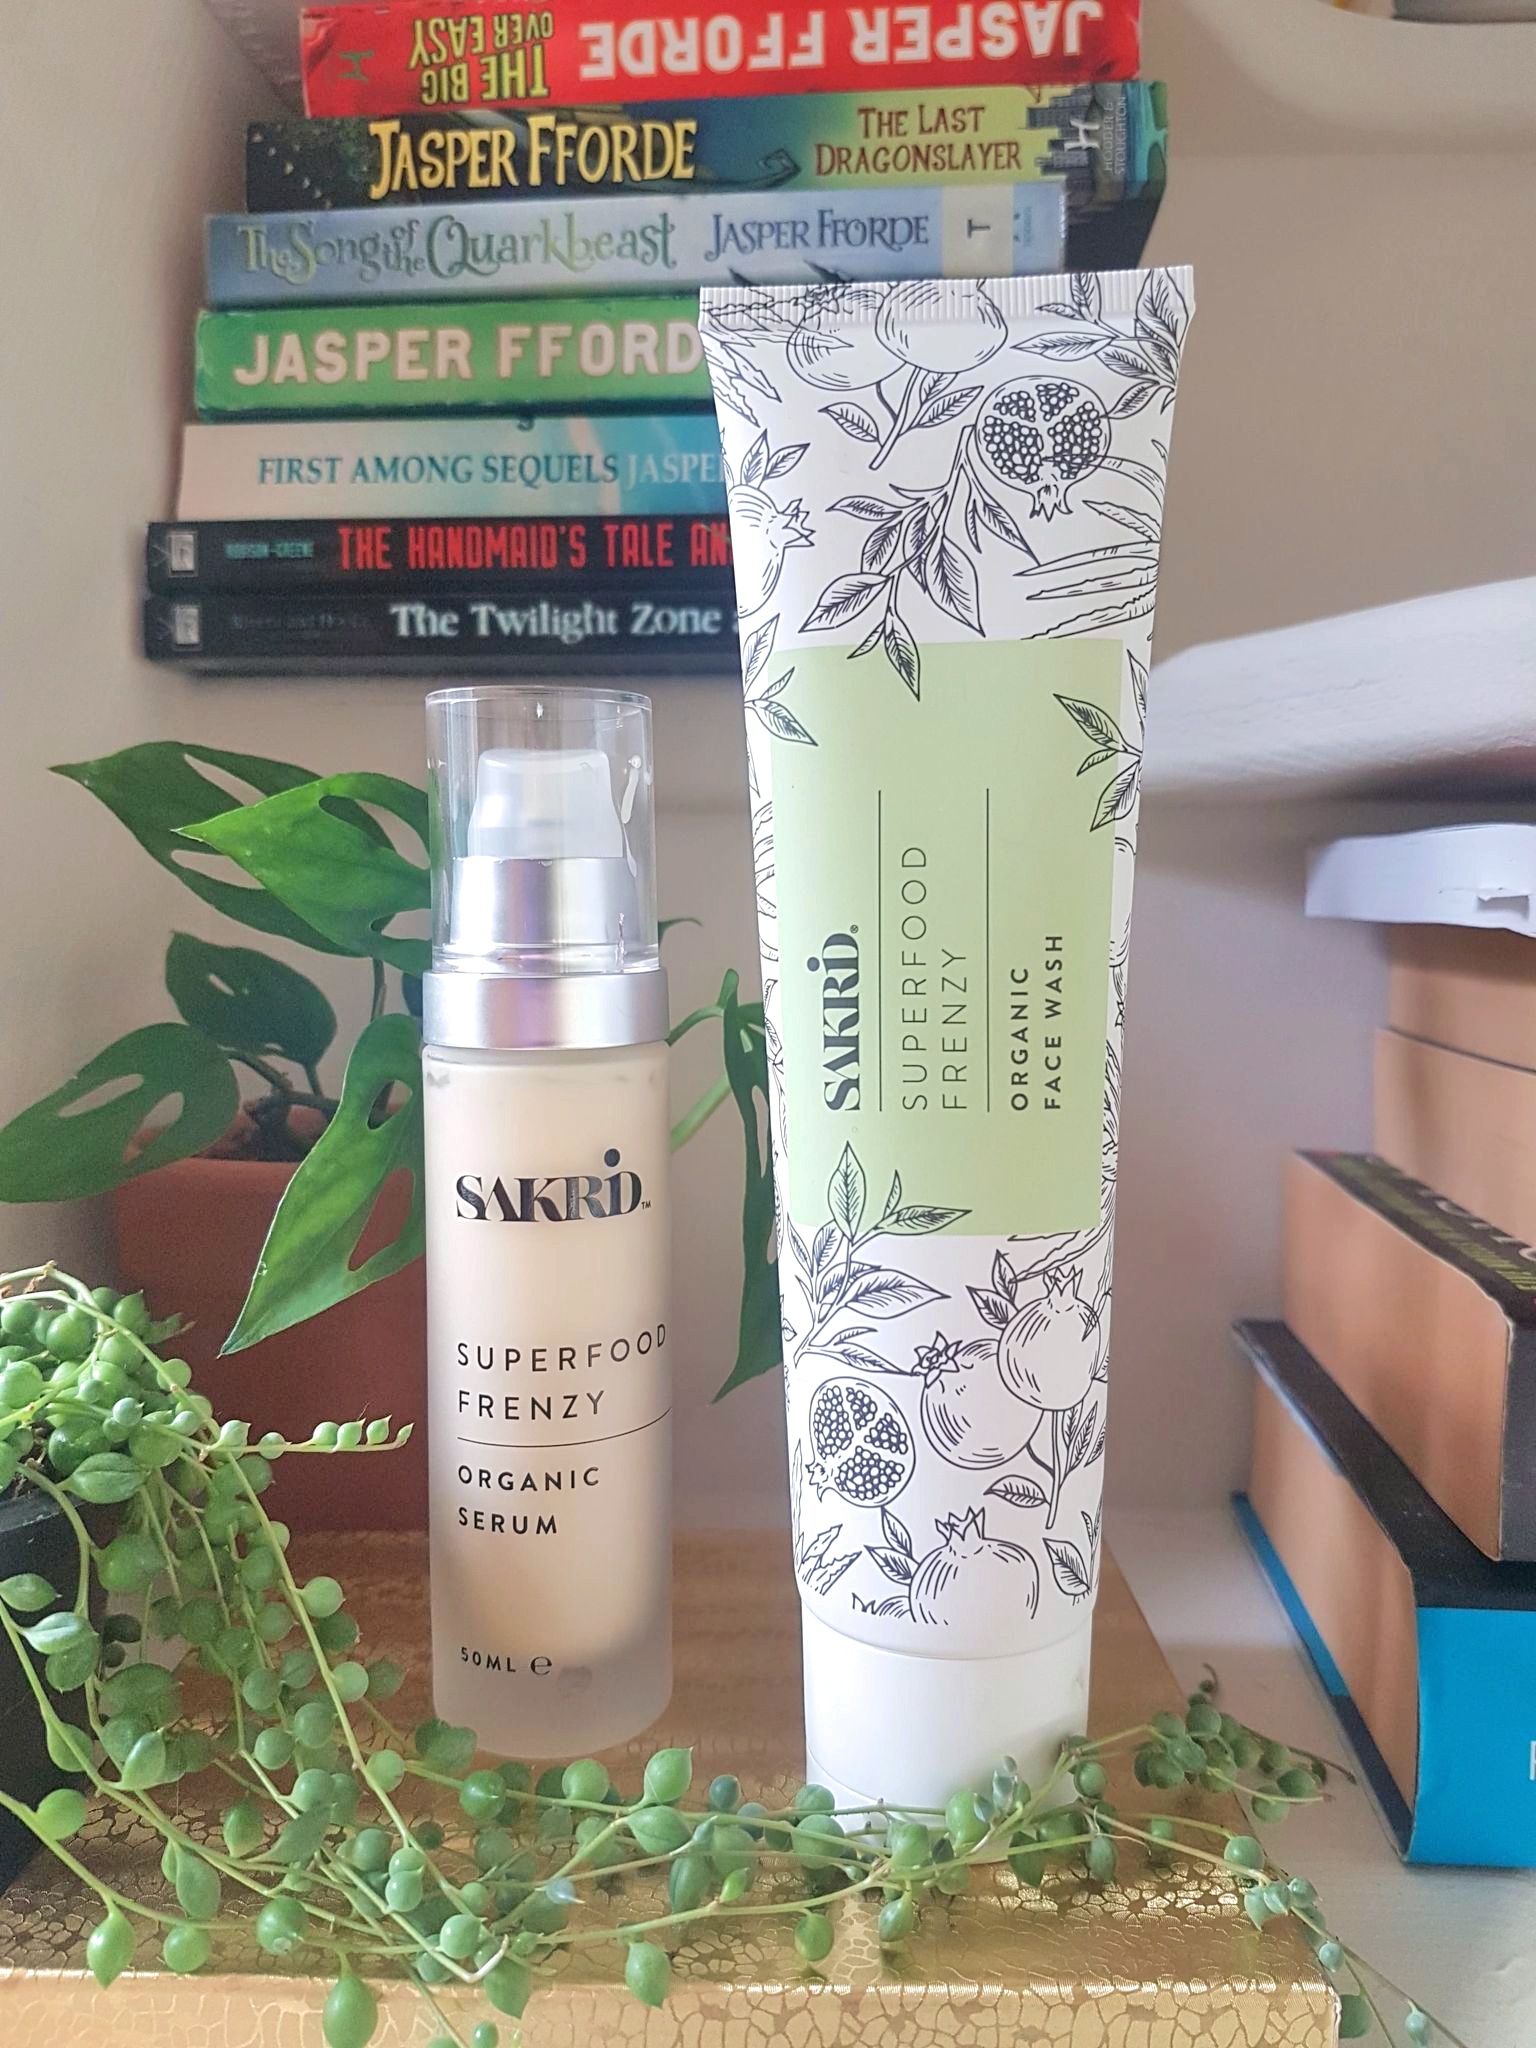 Sakrid Beauty Superfood Frenzy Organic Face Wash and Serum on white steps with books and plants